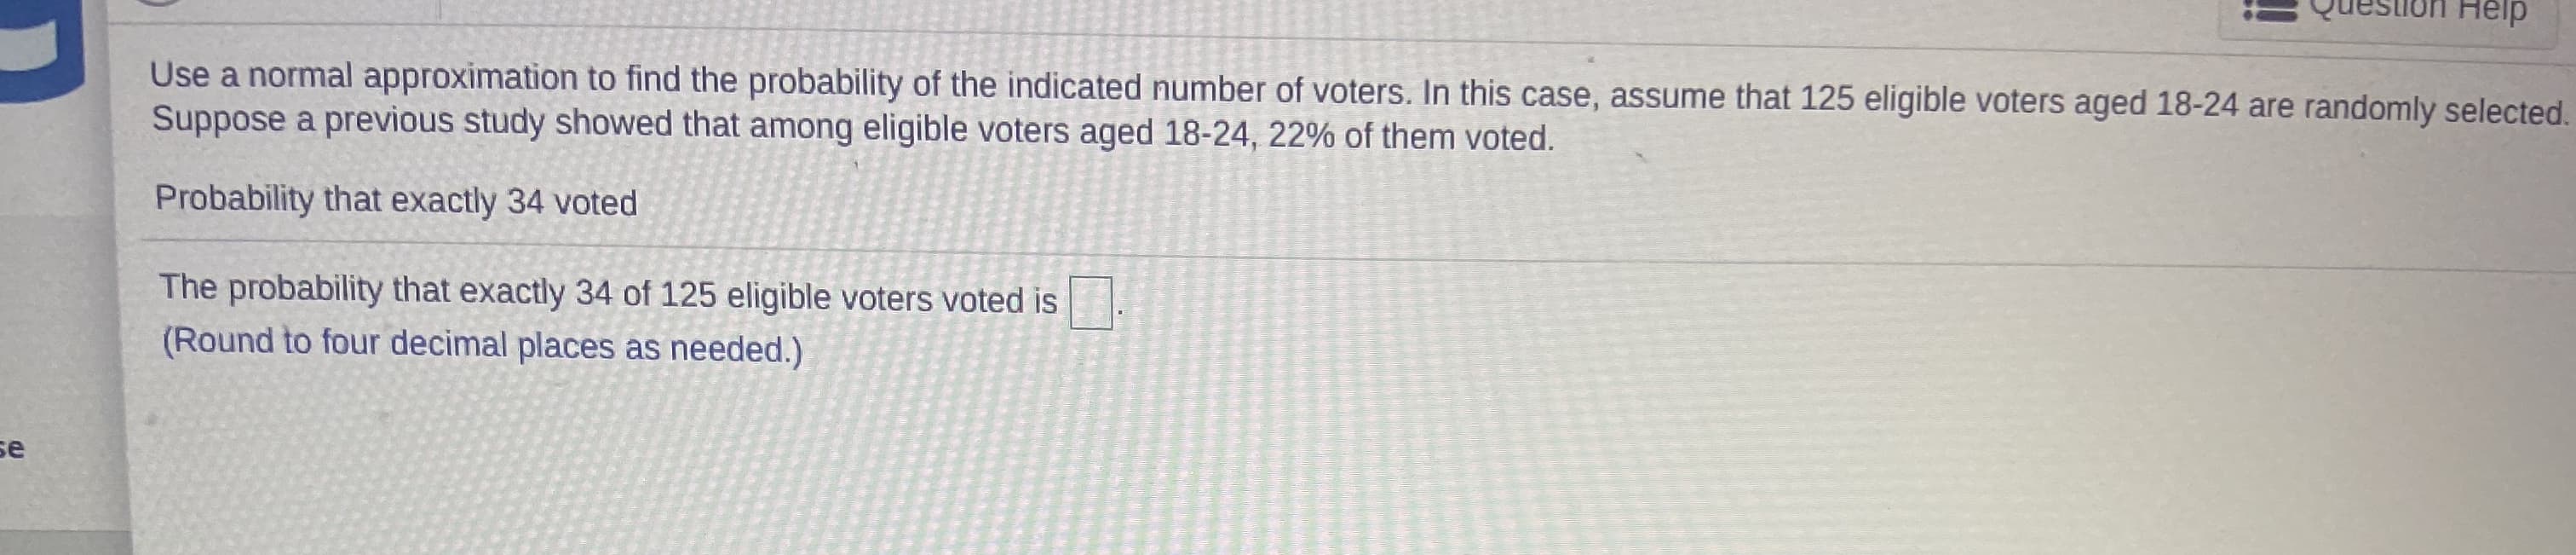 Use a normal approximation to find the probability of the indicated number of voters. In this case, assume that 125 eligible voters aged 18-24 are randomly selected.
Suppose a previous study showed that among eligible voters aged 18-24, 22% of them voted.
Probability that exactly 34 voted
The pro bability that oxactly 24 of 135
